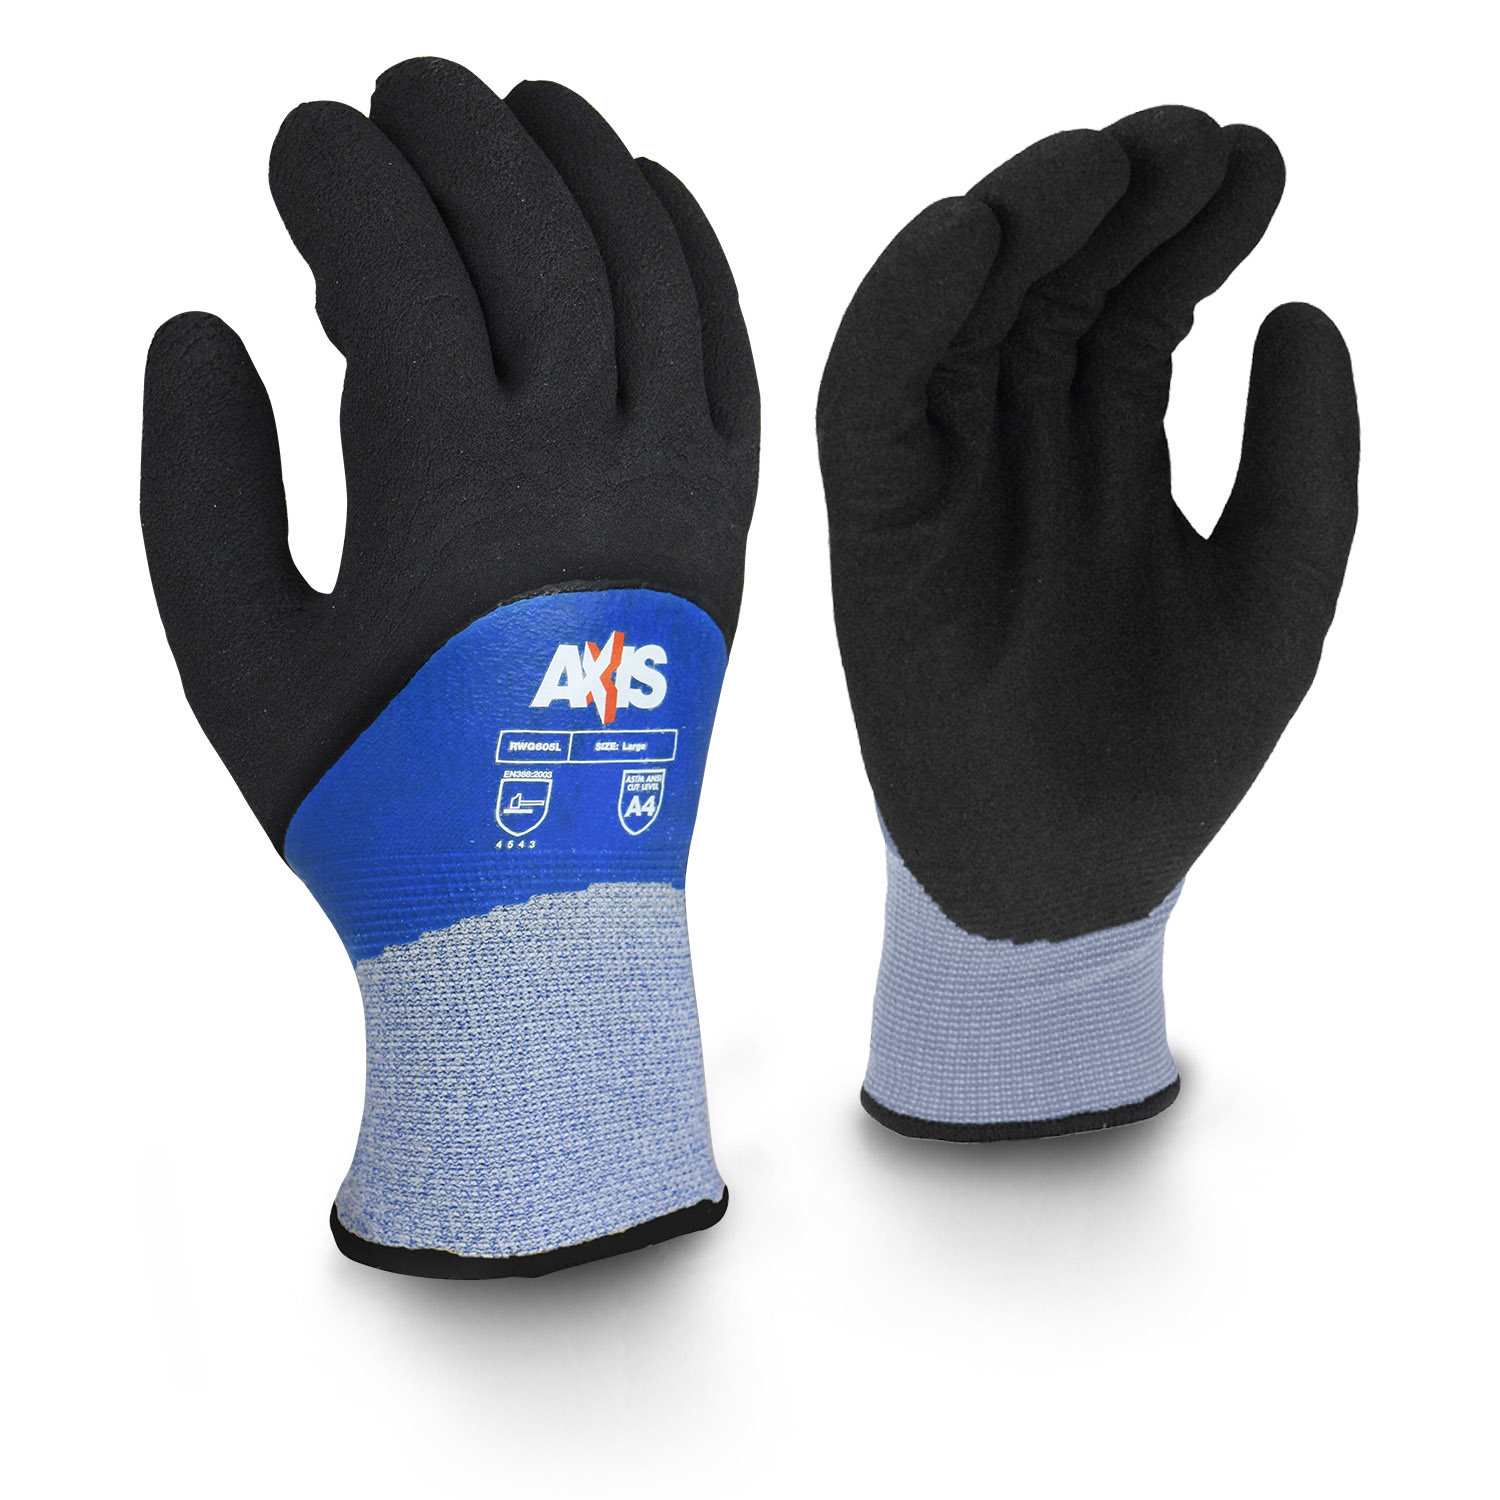 RWG605 Winter Cut Resistant Work Gloves (Cut: A4) - Radians